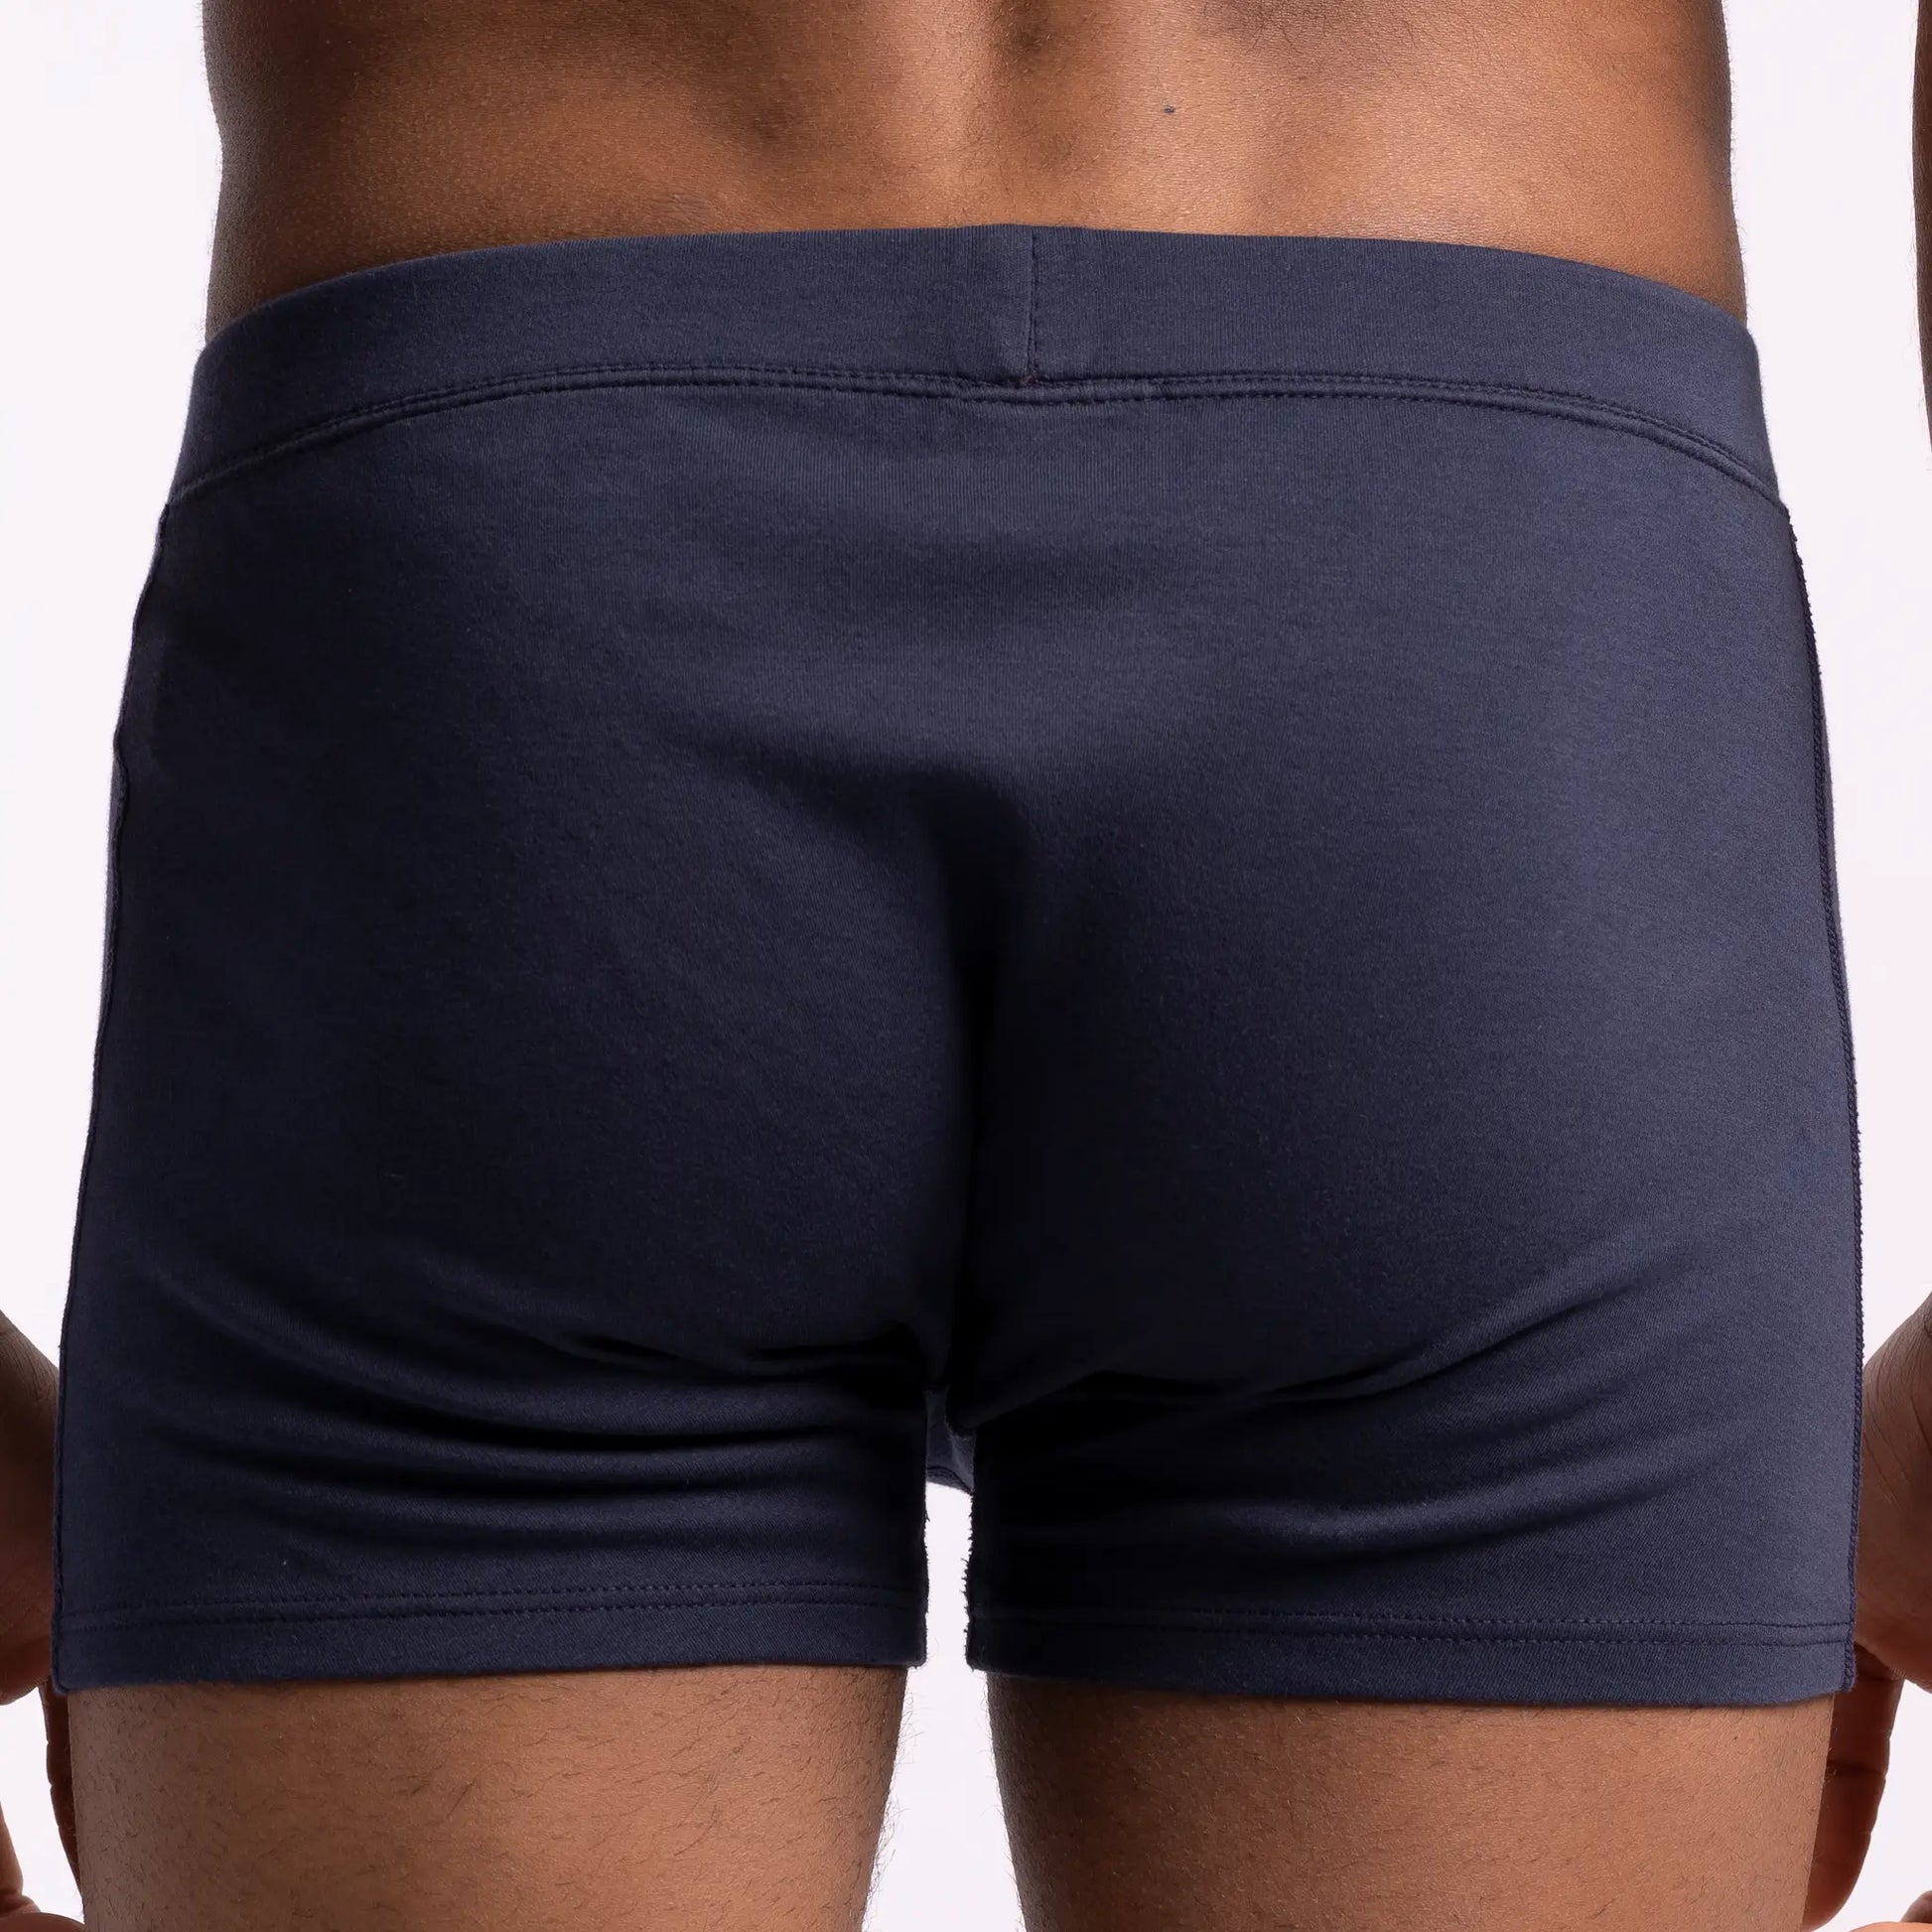 Organic Cotton Boxer Under Shorts For Men 3 Pack, Breathable Mesh Underwear,  Modal, Asian Sizes M XXL From Clothes6, $20.59